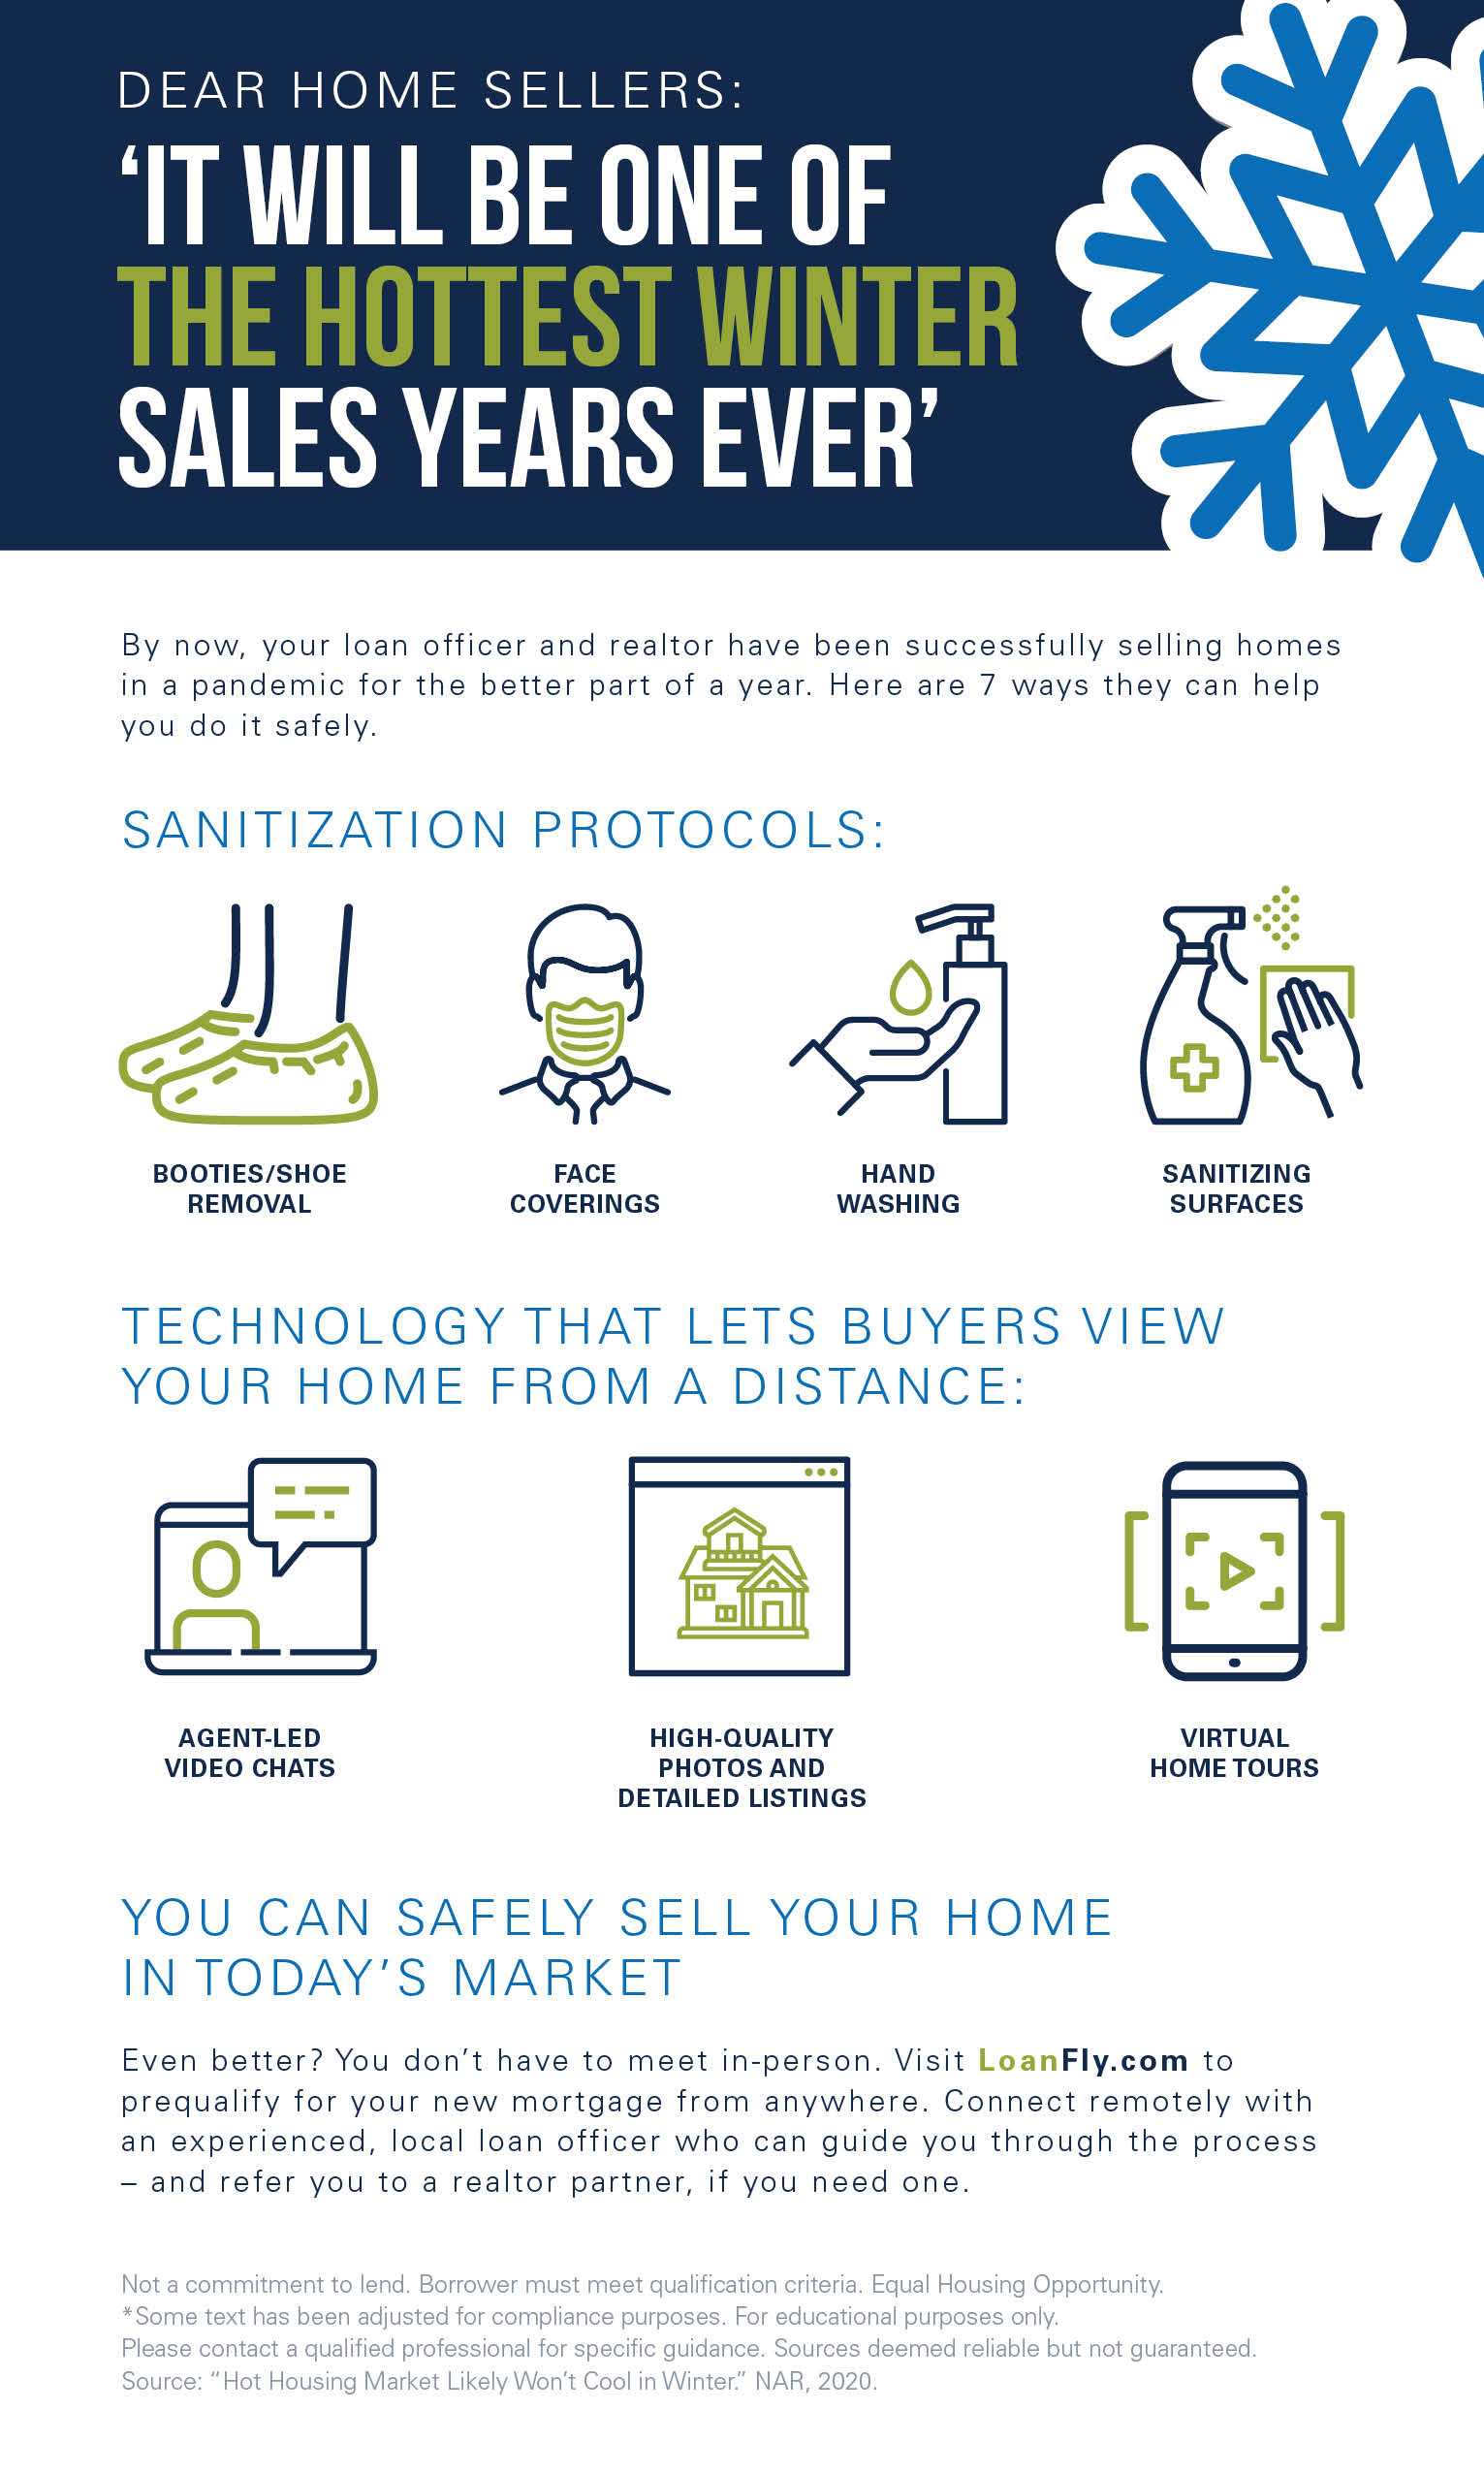 7 safe homeselling tips you can use right now [INFOGRAPHIC